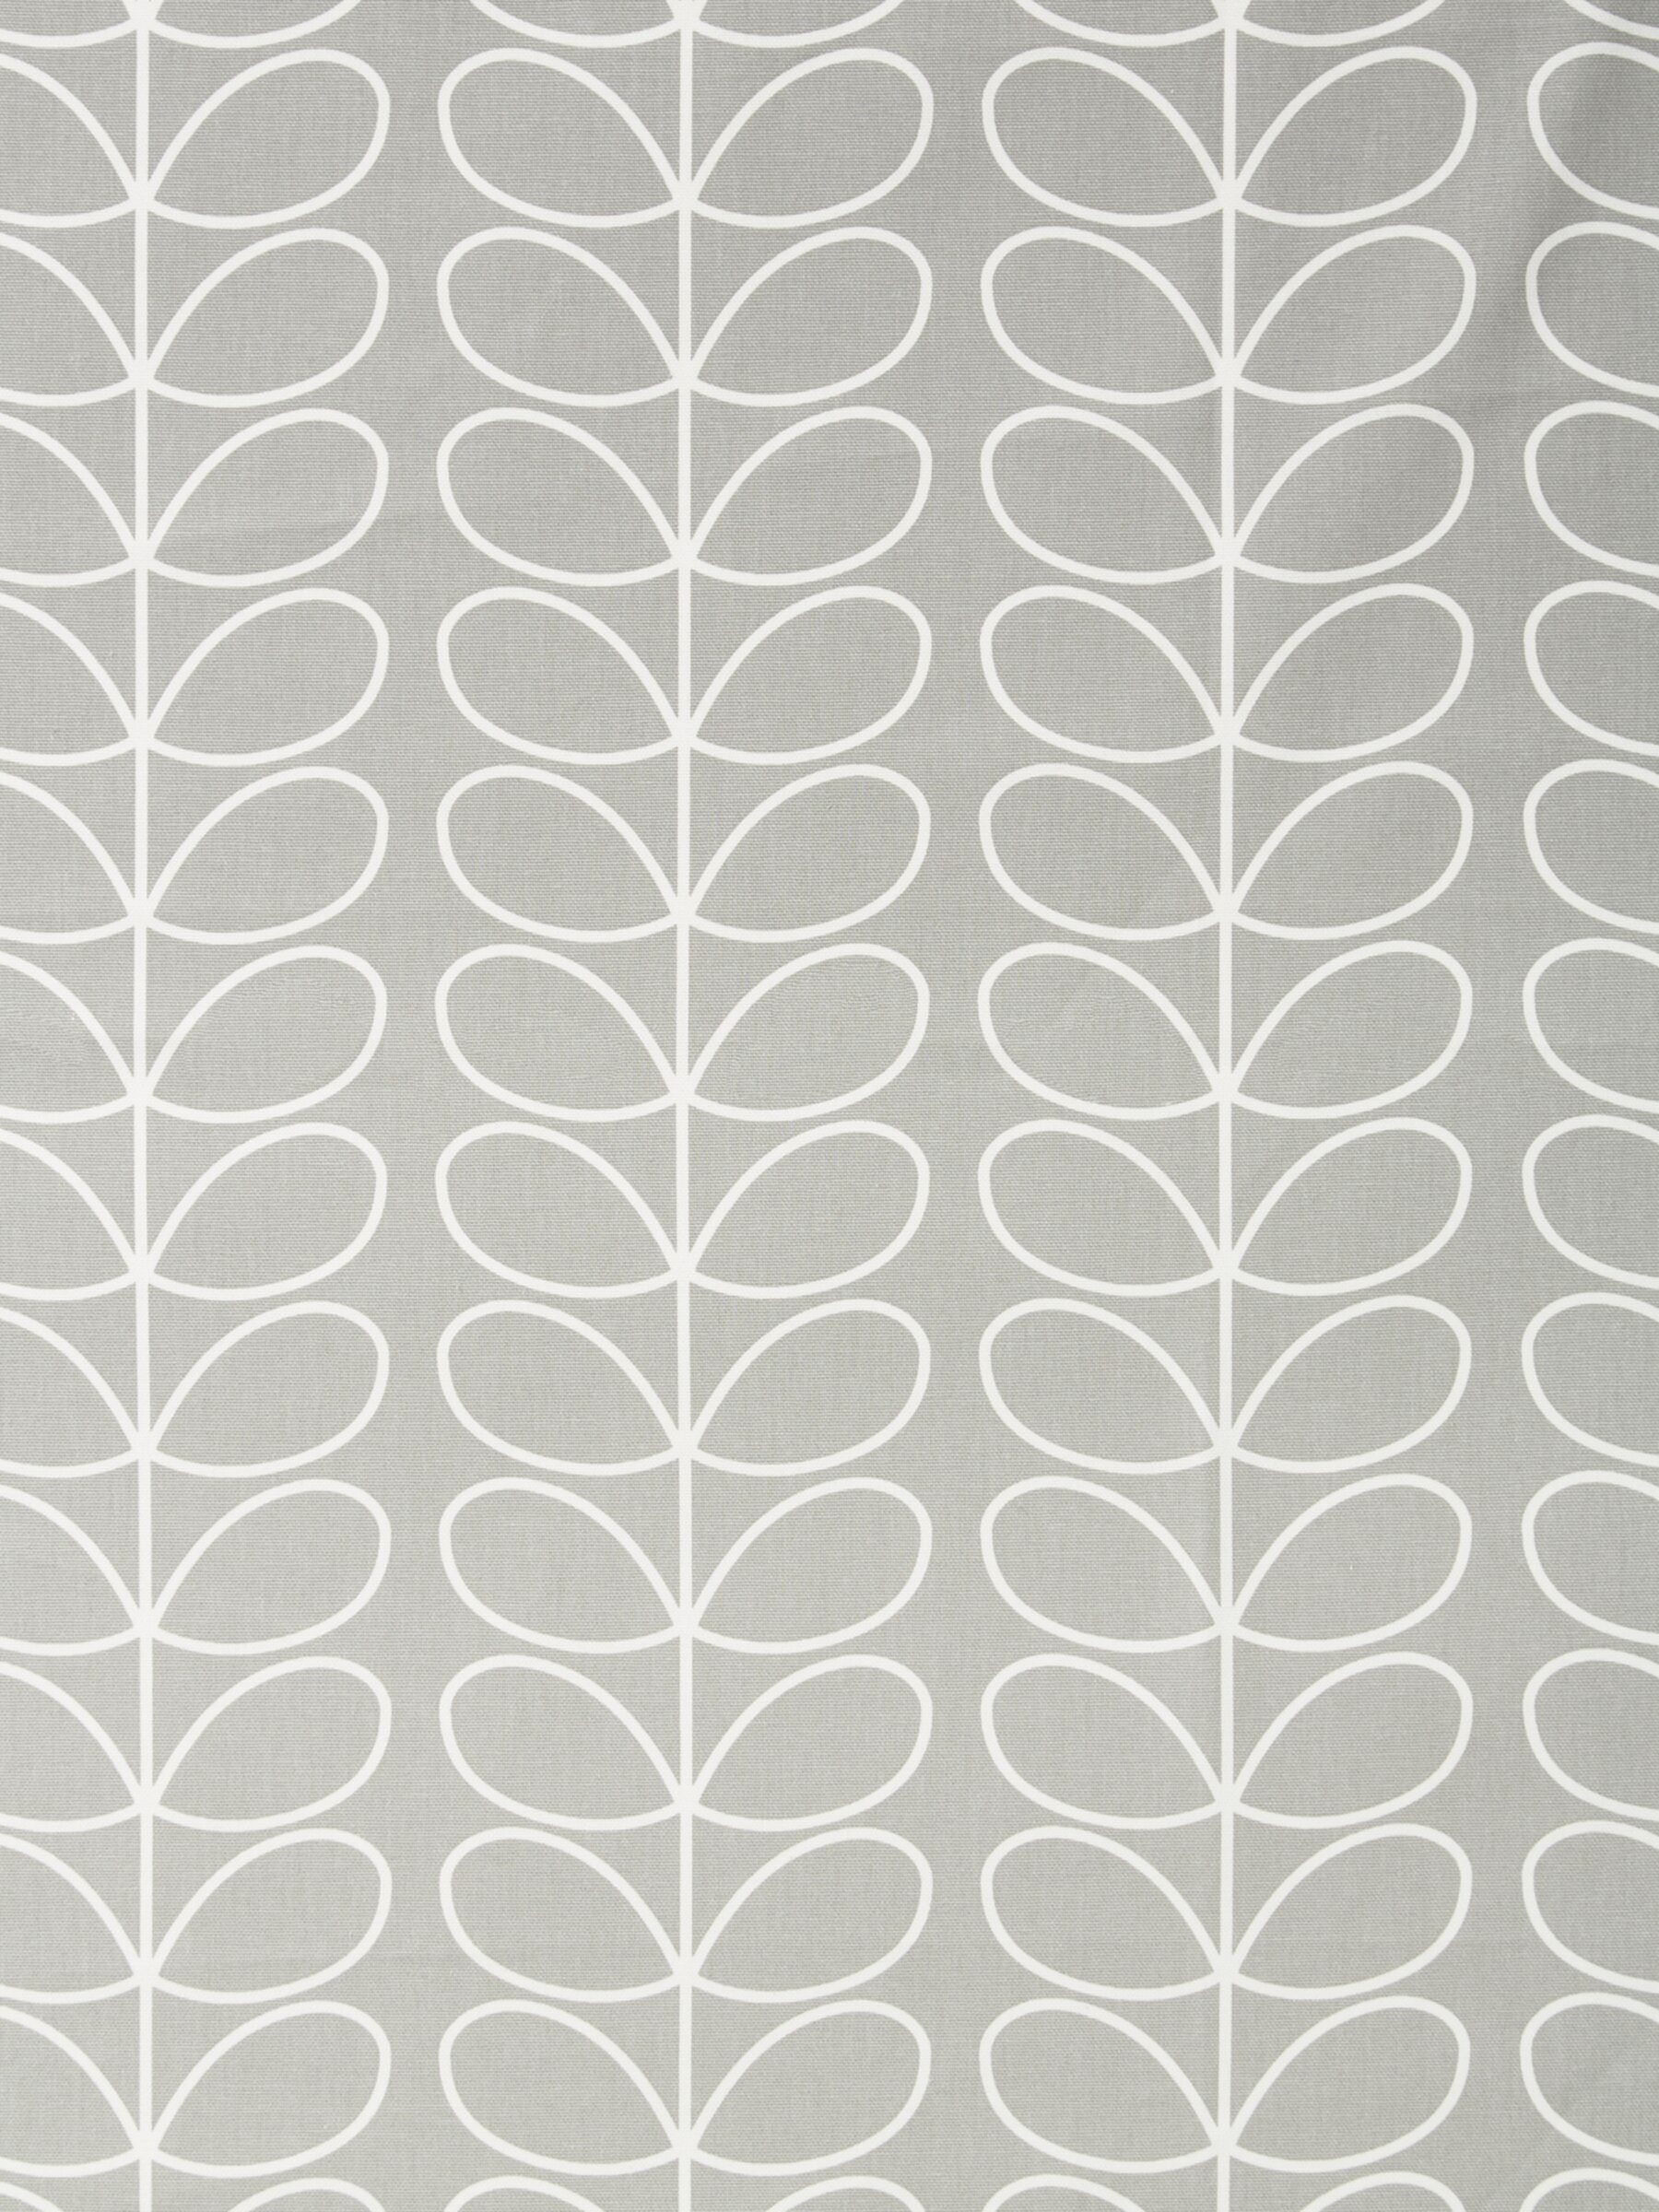 Orla Kiely Linear Stem Made to Measure Curtains or Roman Blind, Silver